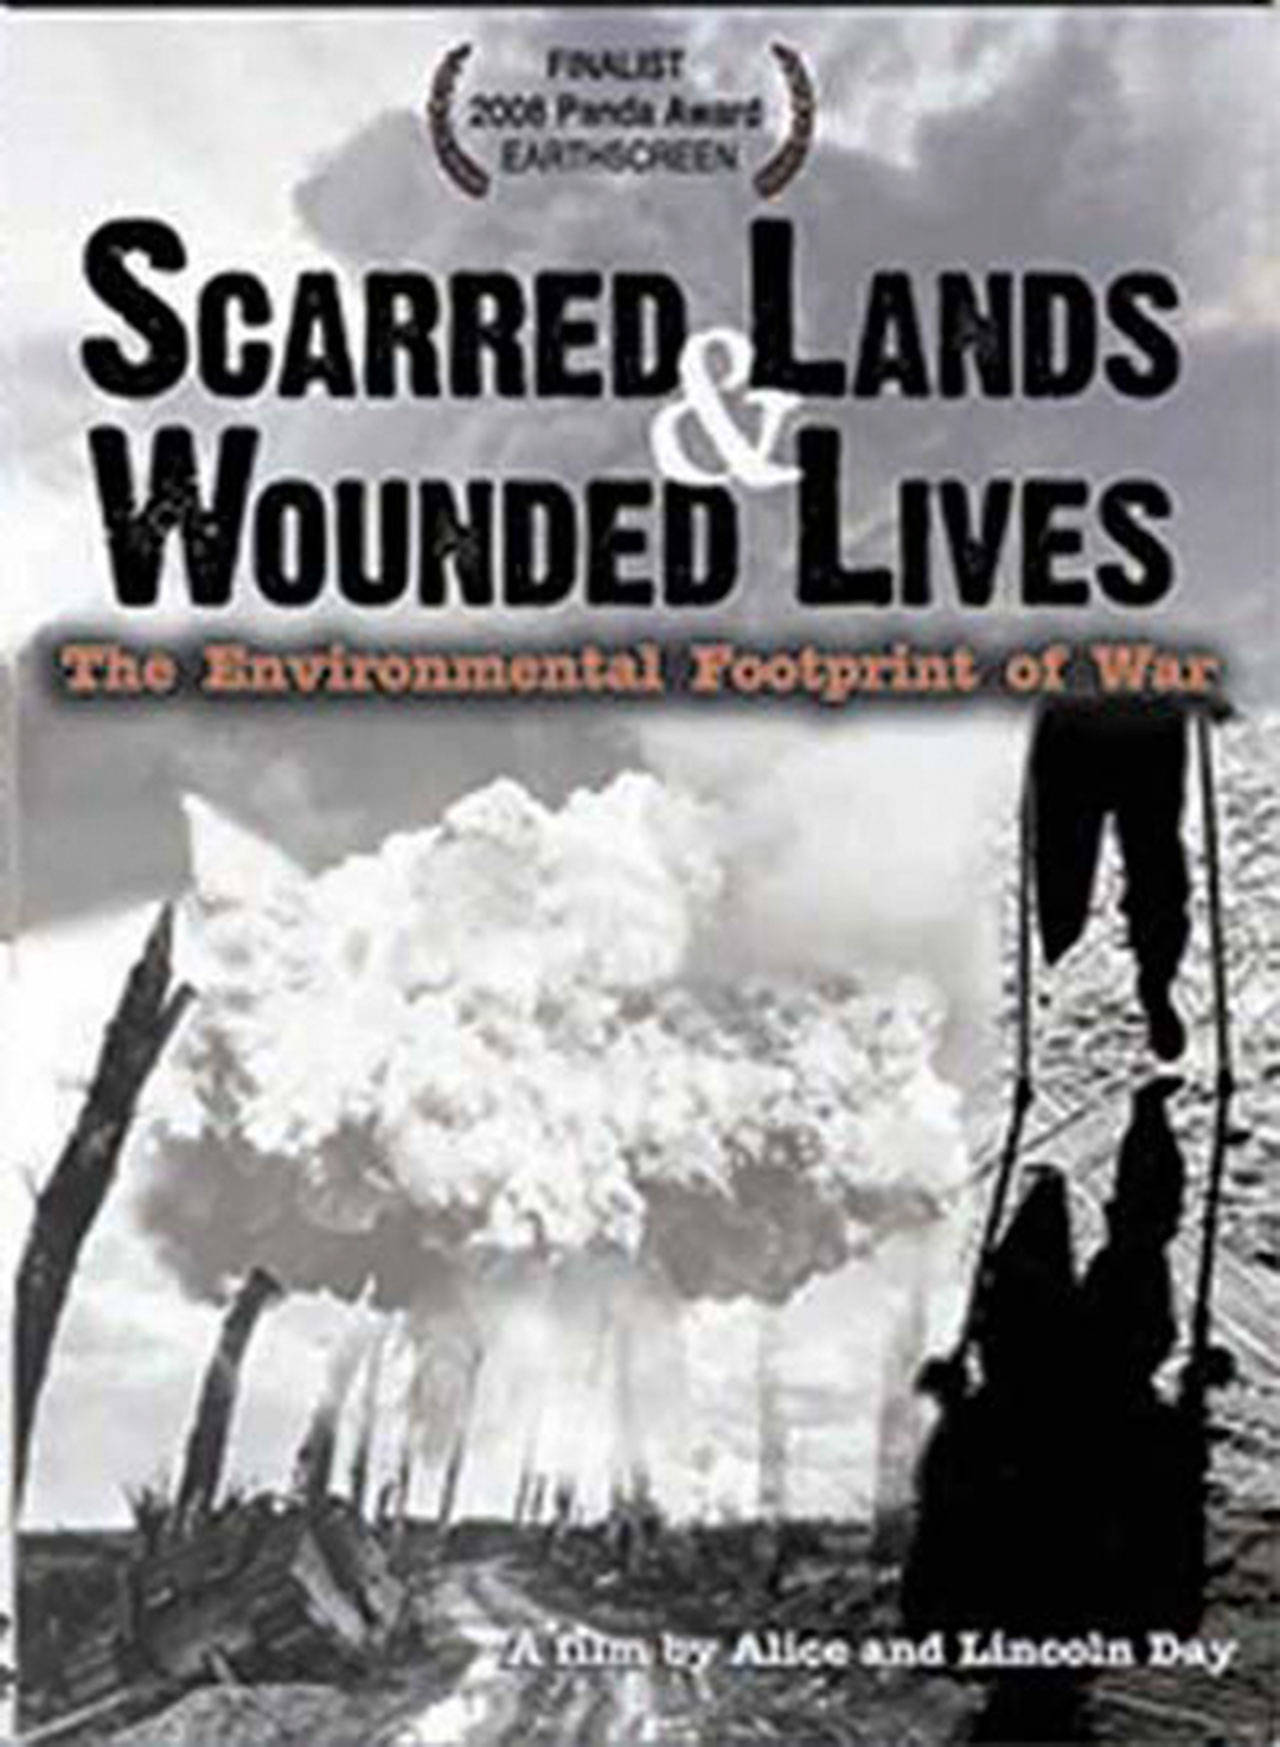 Image courtesy of Free Range Films | The war documentary “Scarred Lands & Wounded Lives” will be screened at 3 p.m. Sunday, Dec. 10 at the The Ground Zero Center (16159 Clear Creek Road NW, Poulsbo).